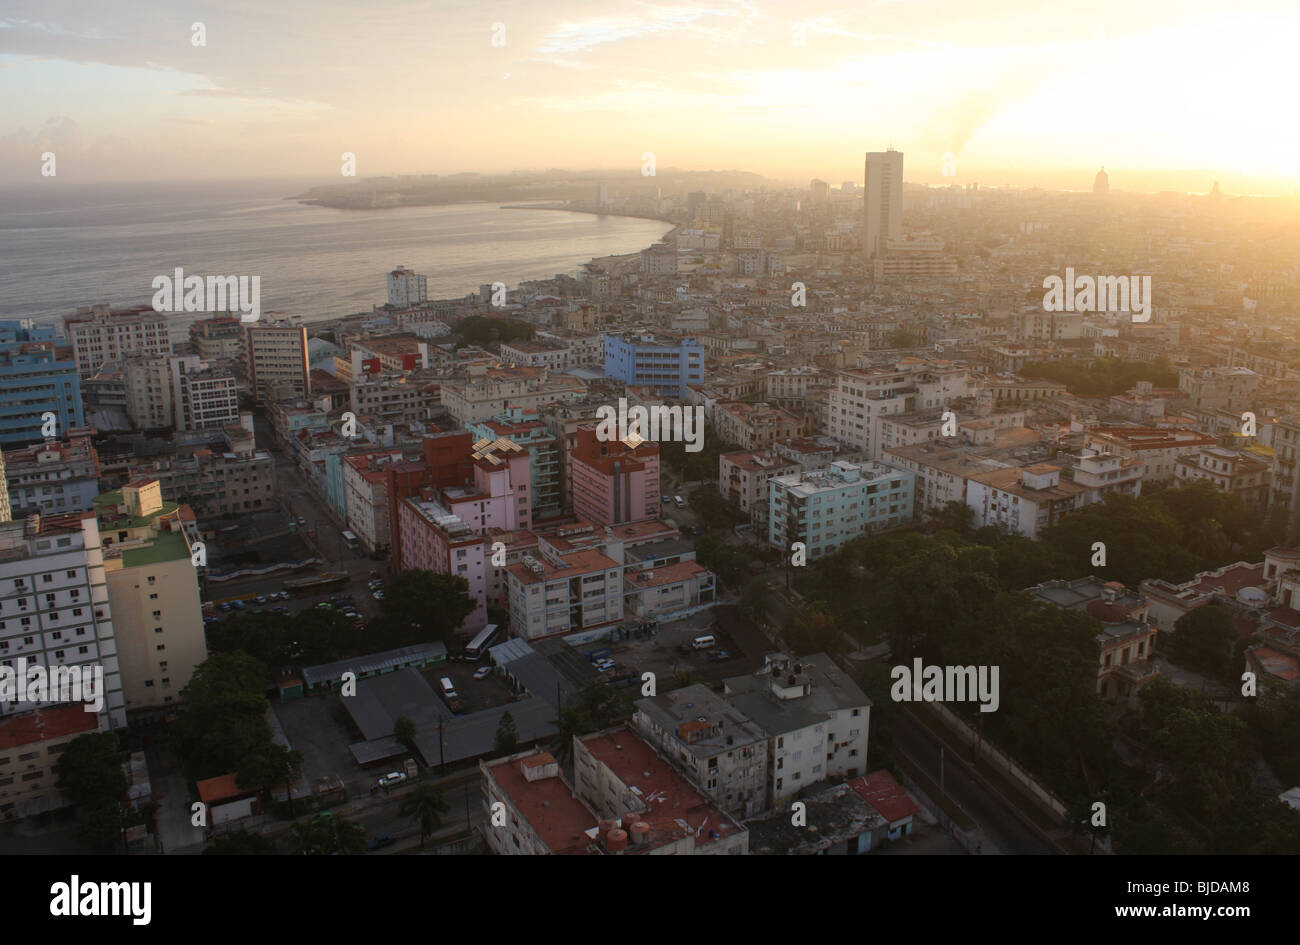 View of Havana in Cuba taken from the Hotel Tryp Habana Libre. Stock Photo